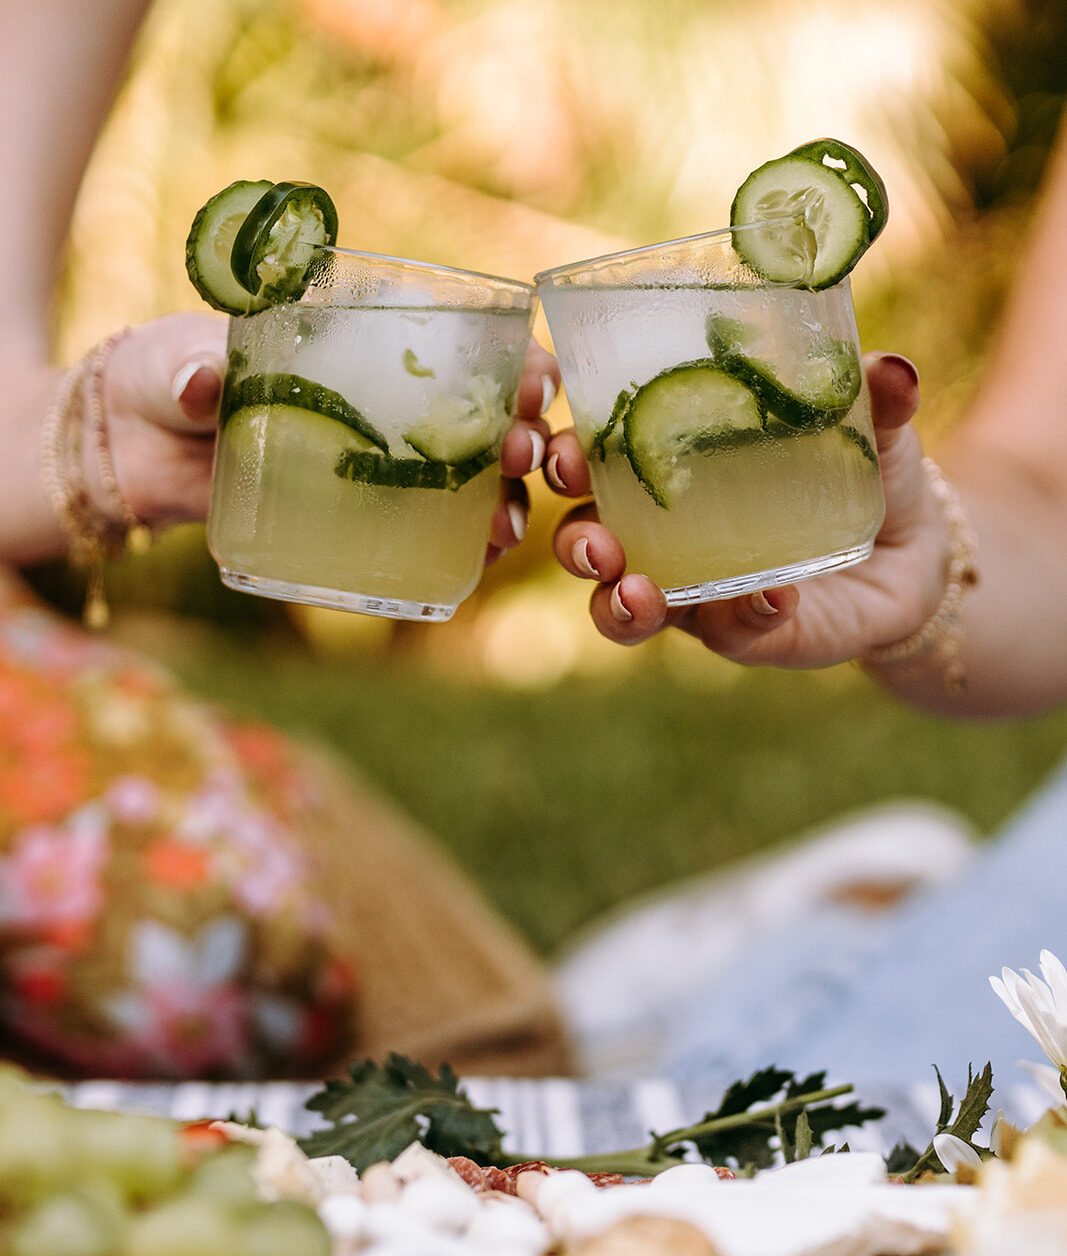 This Garden Gin and Tonic Recipe combines cucumber, jalapeño, lime and honey syrup to make the perfect spring and summer cocktail recipe! | kirstenturk.com